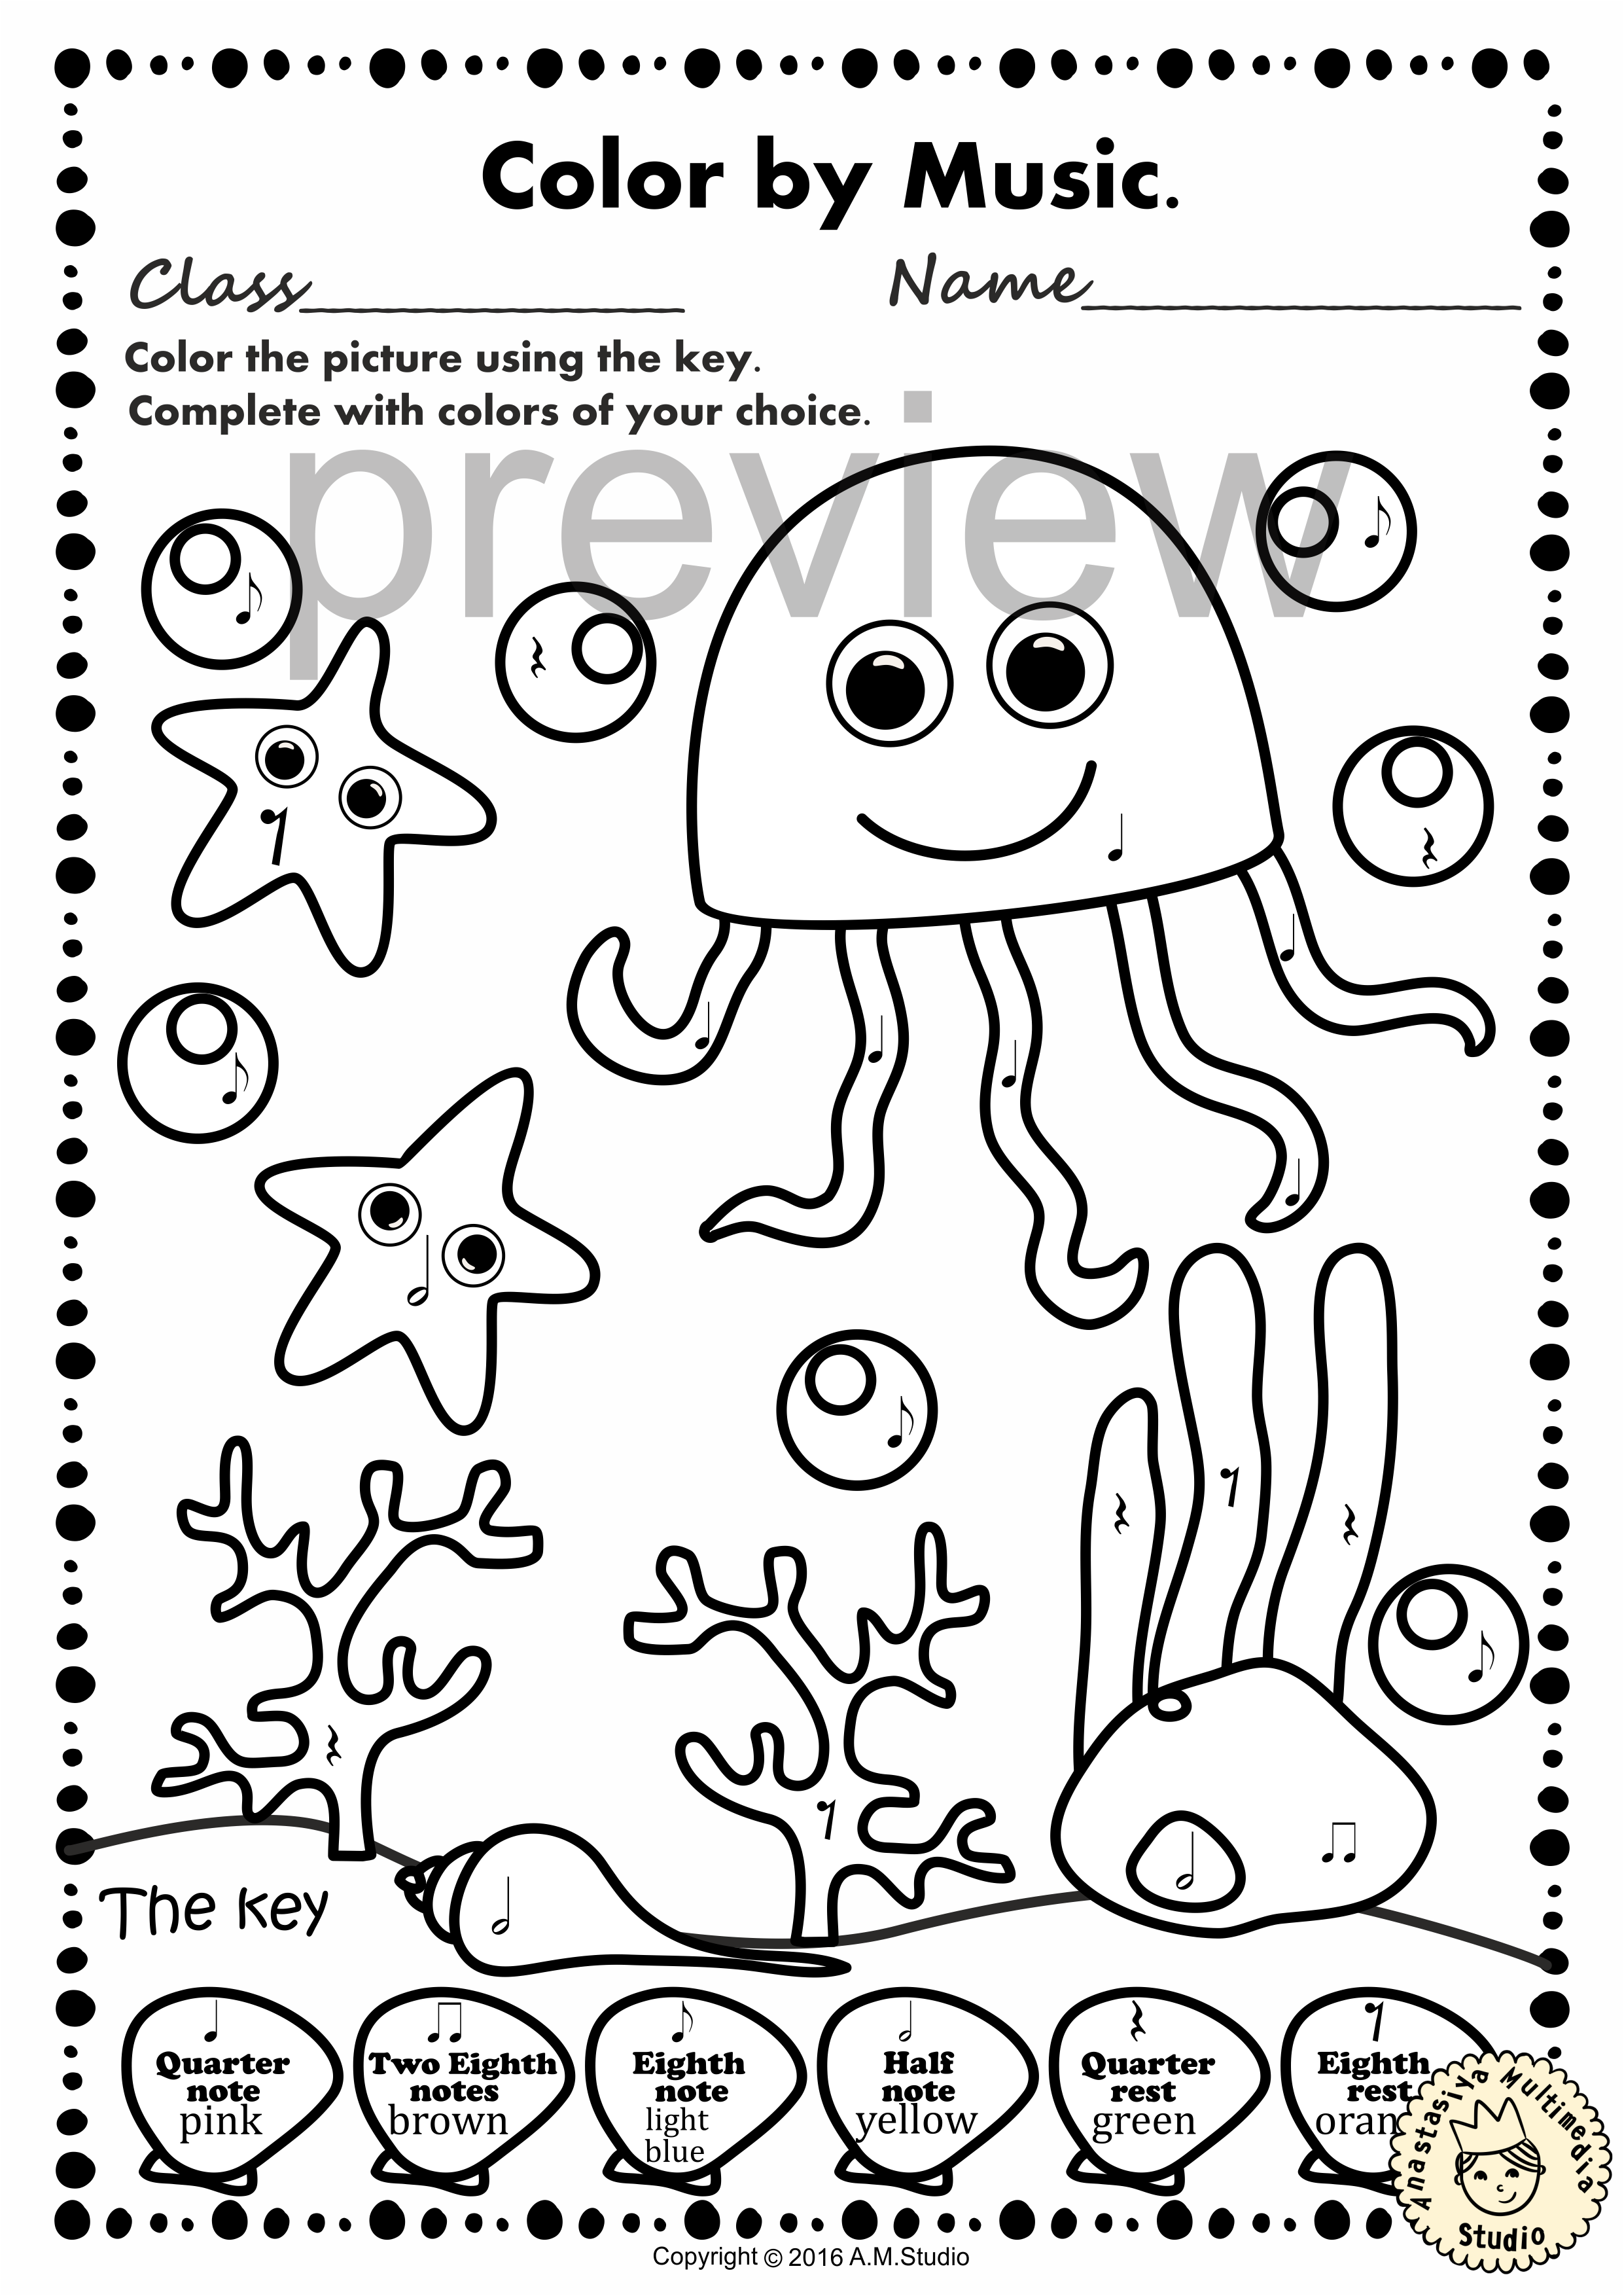 Ocean Animals Music Coloring Pages & Worksheets | Color by Notes and Rests (img # 1)